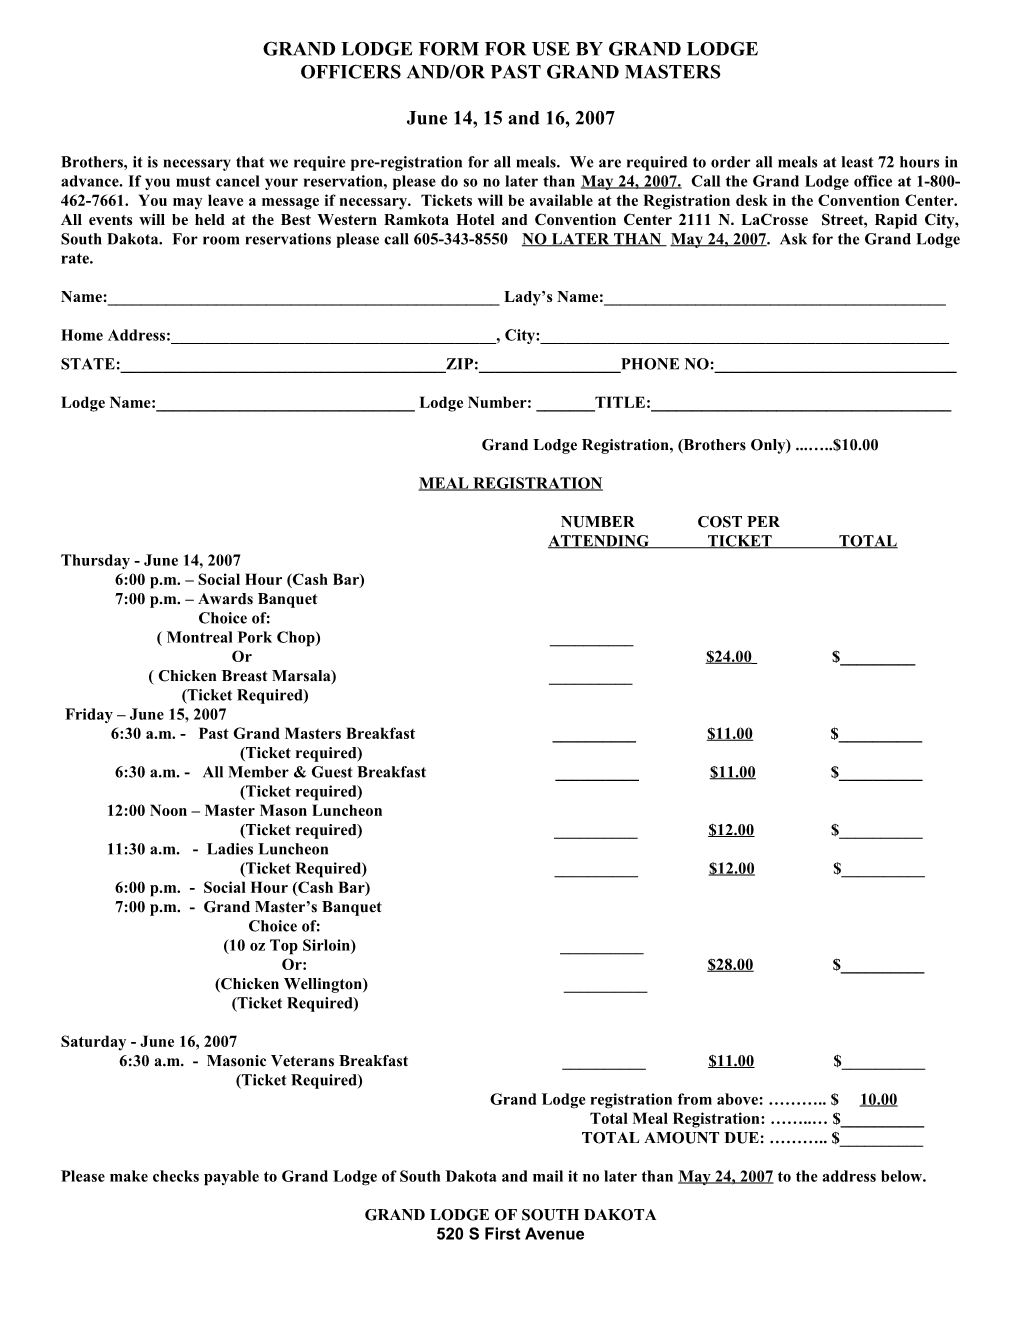 Grand Lodge Form for Use by Gand Lodge